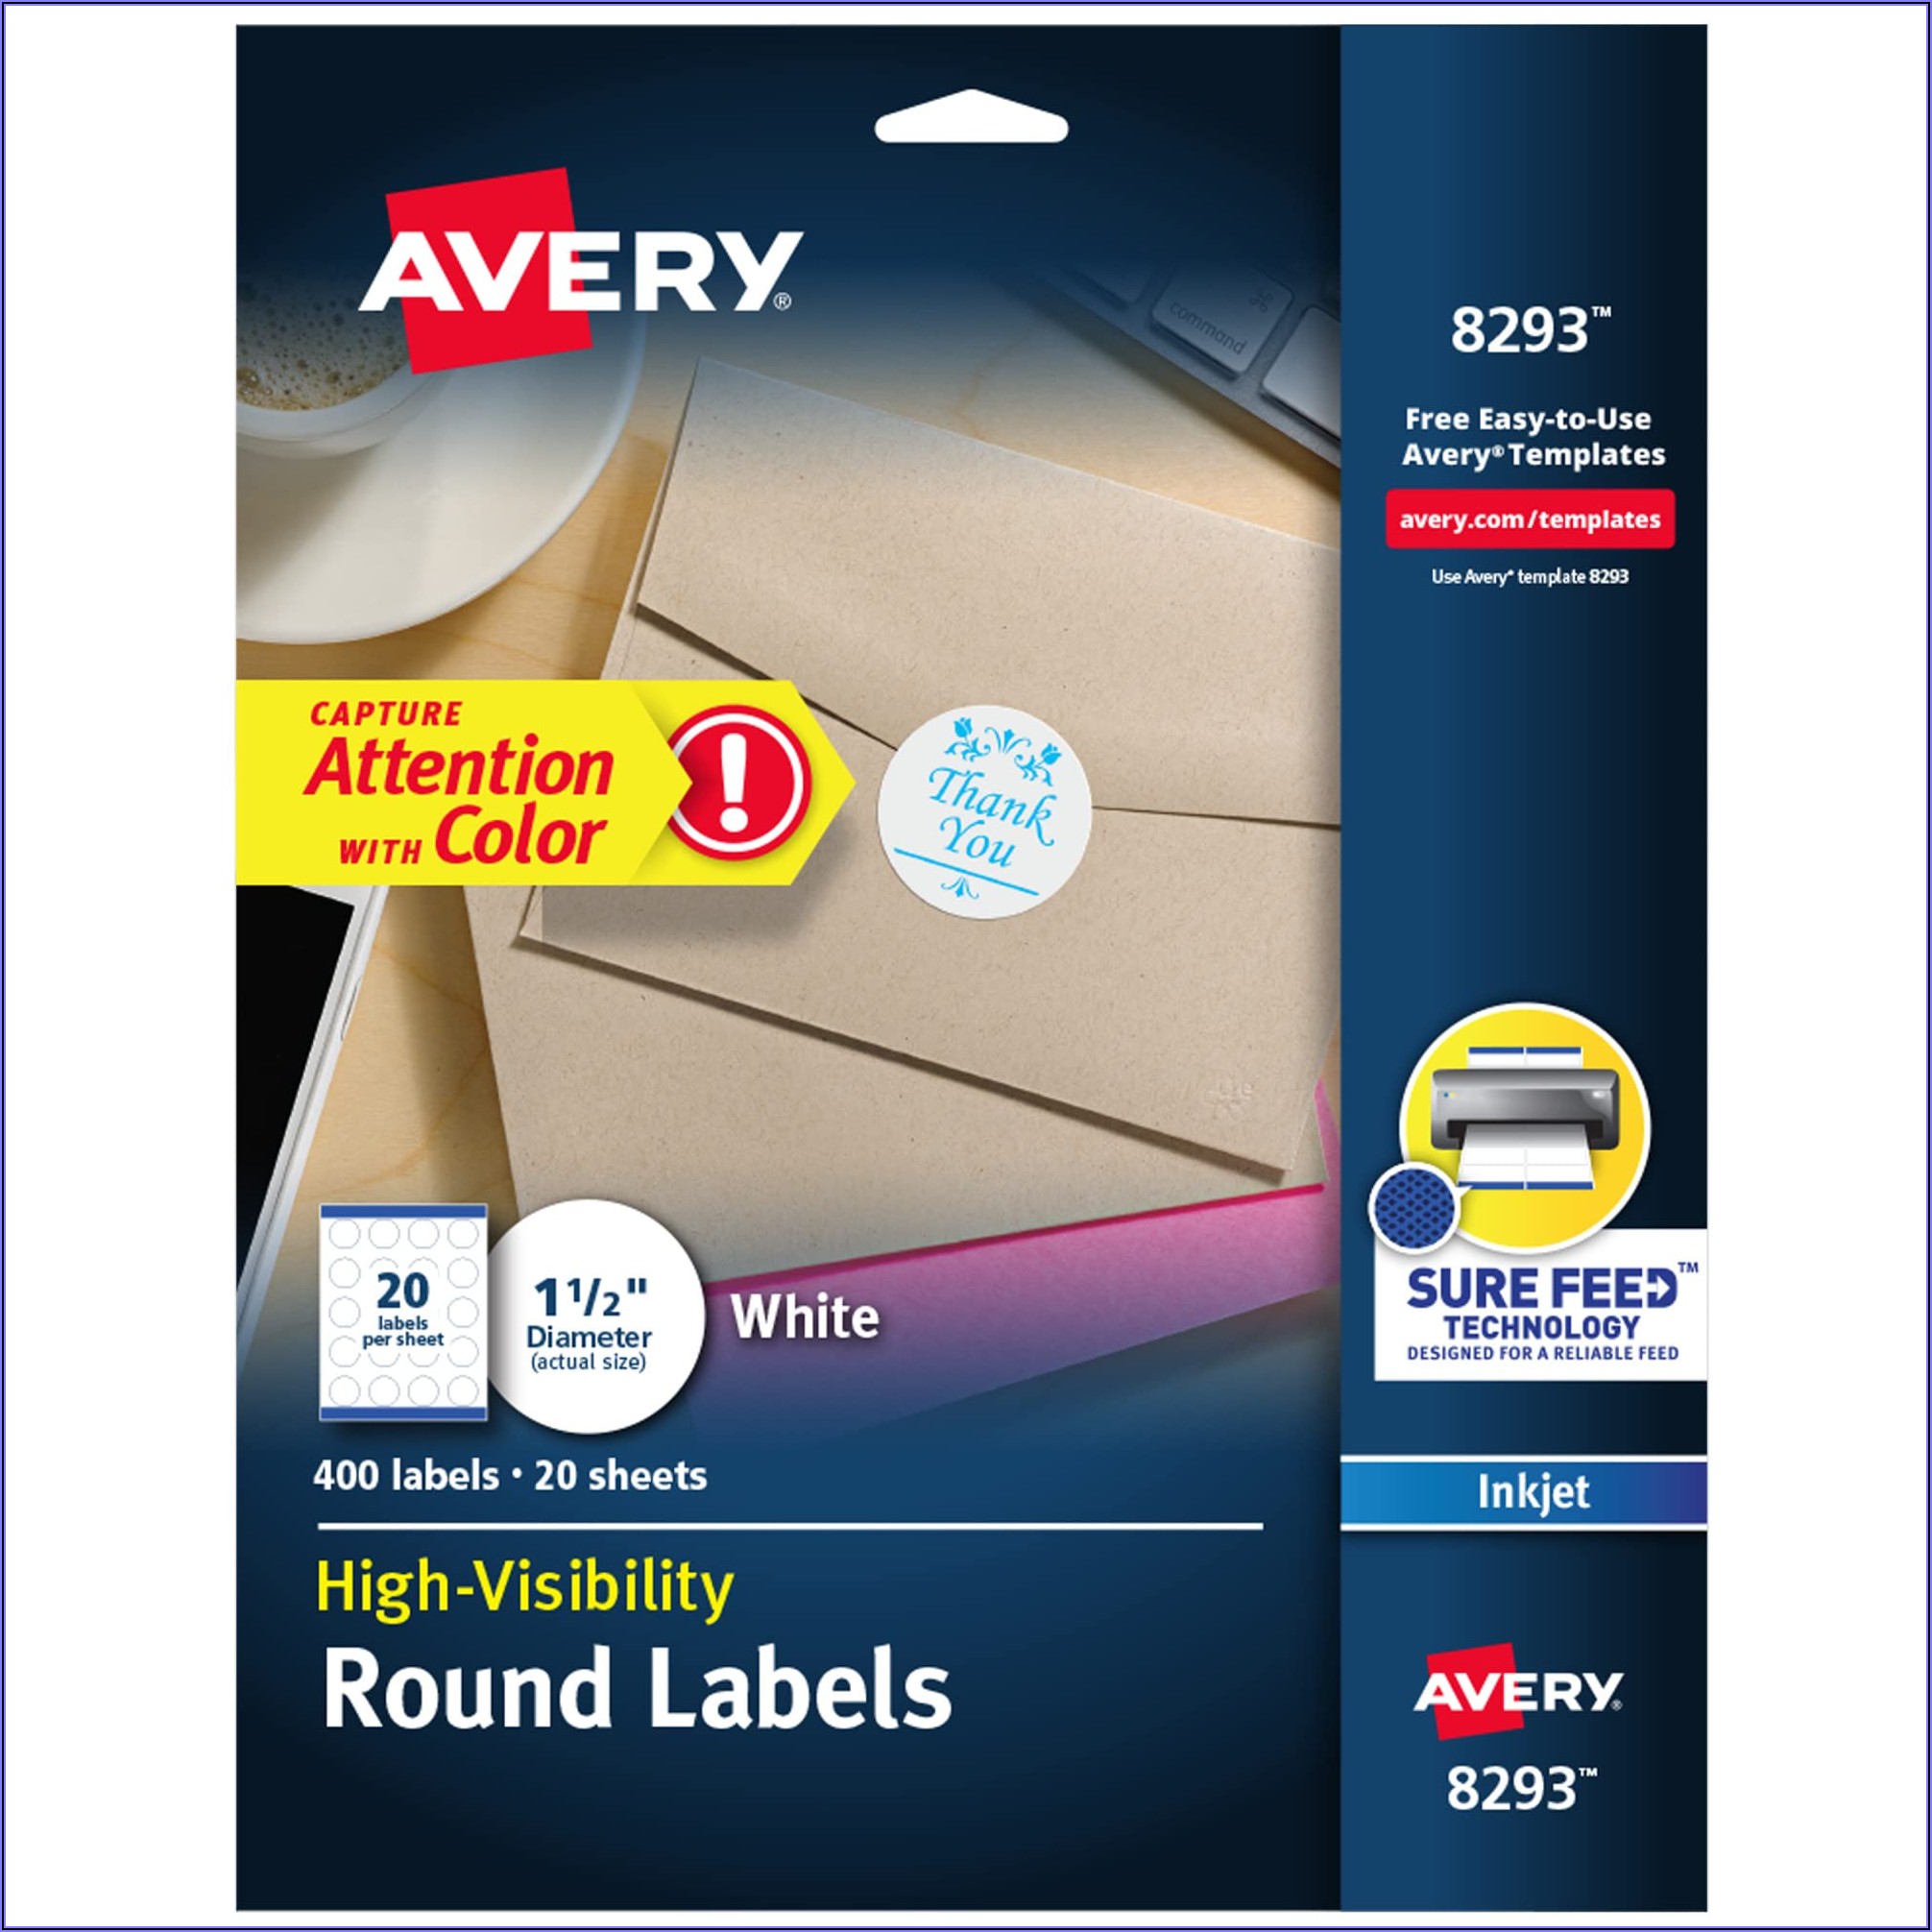 Avery Round Label Template 5293